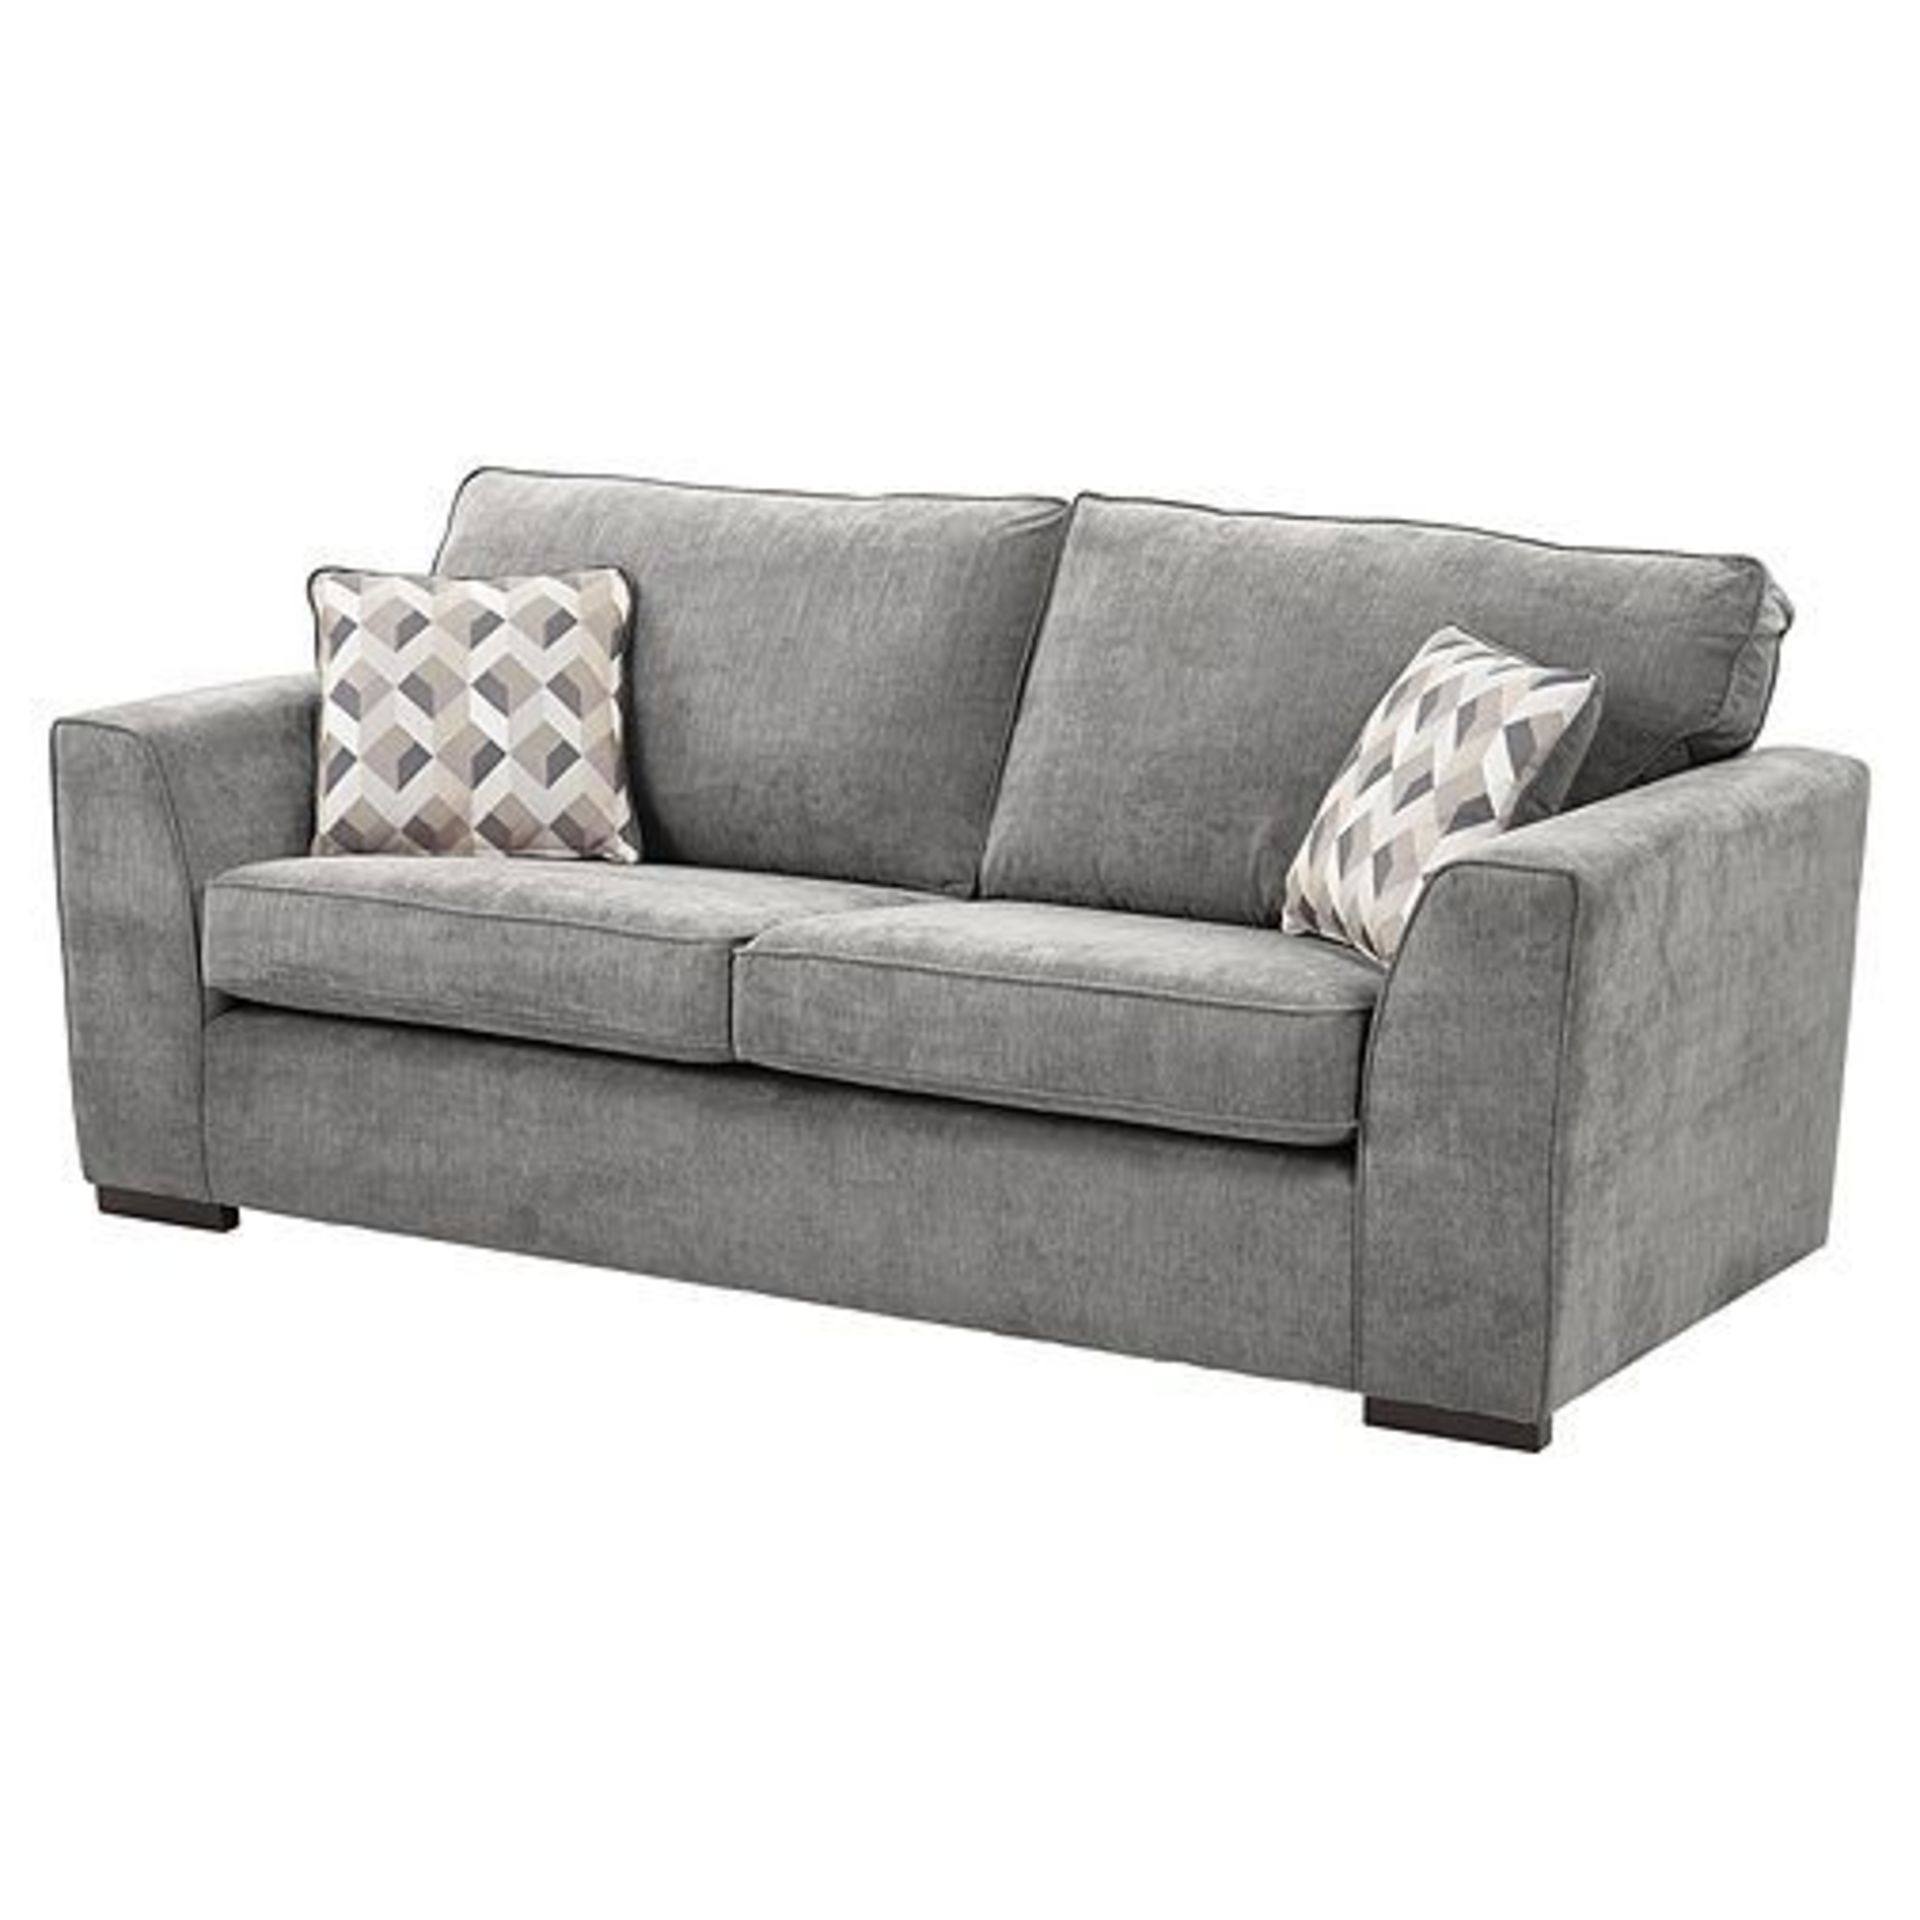 1 BRAND NEW BAGGED BOSTON 3 SEATER SOFA IN DARK GREY / 42592 (VIEWING HIGHLY RECOMMENDED)